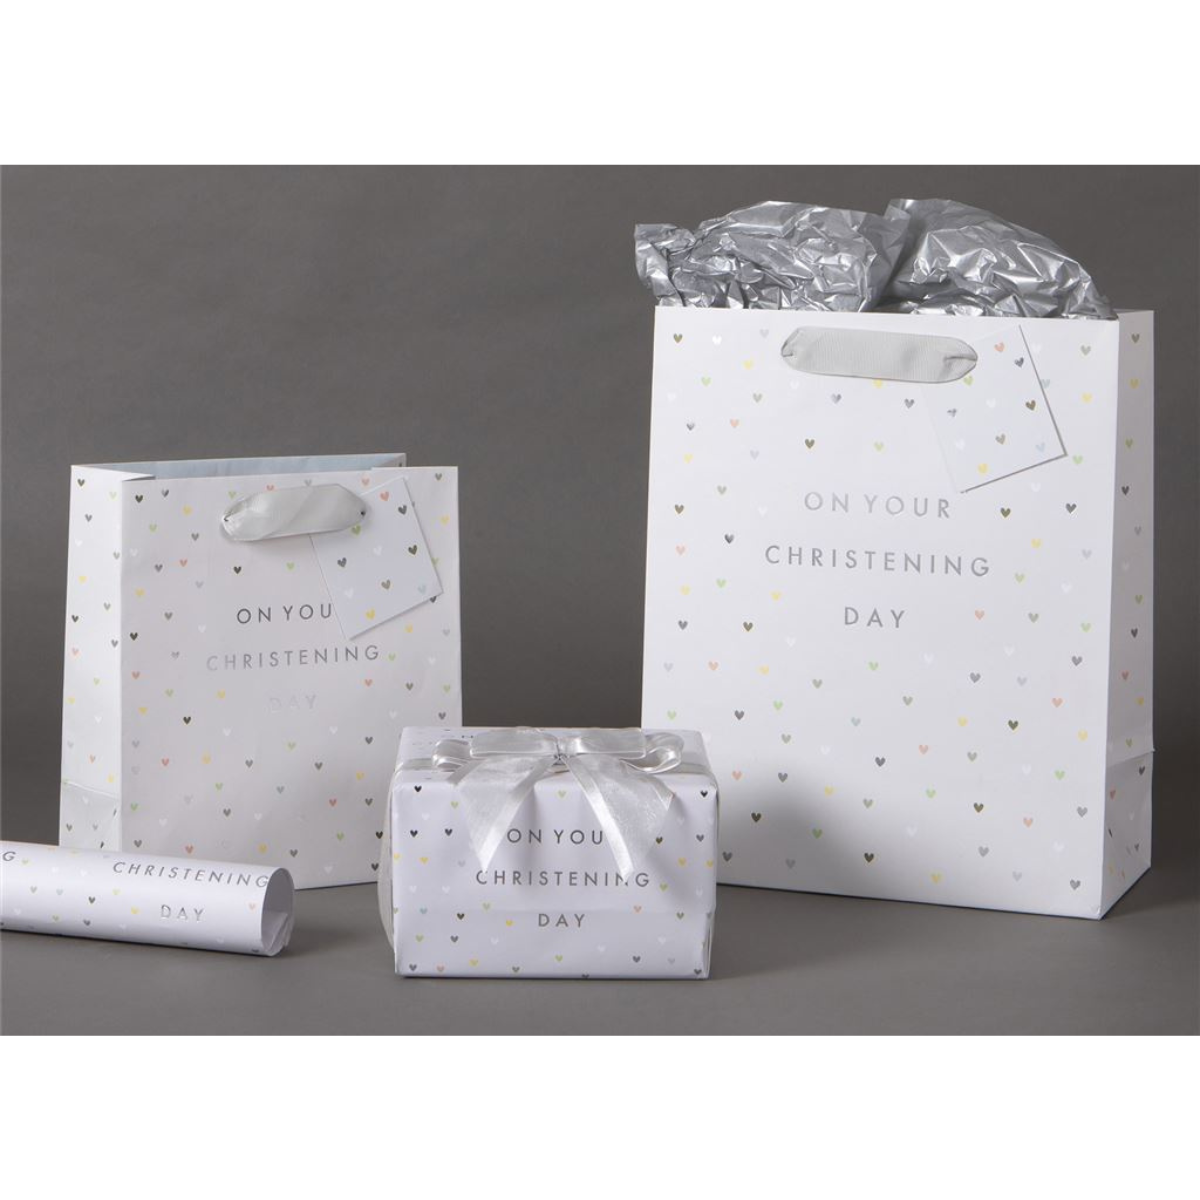 Giftwrap - Luxury Christening Hearts Wrapping Paper